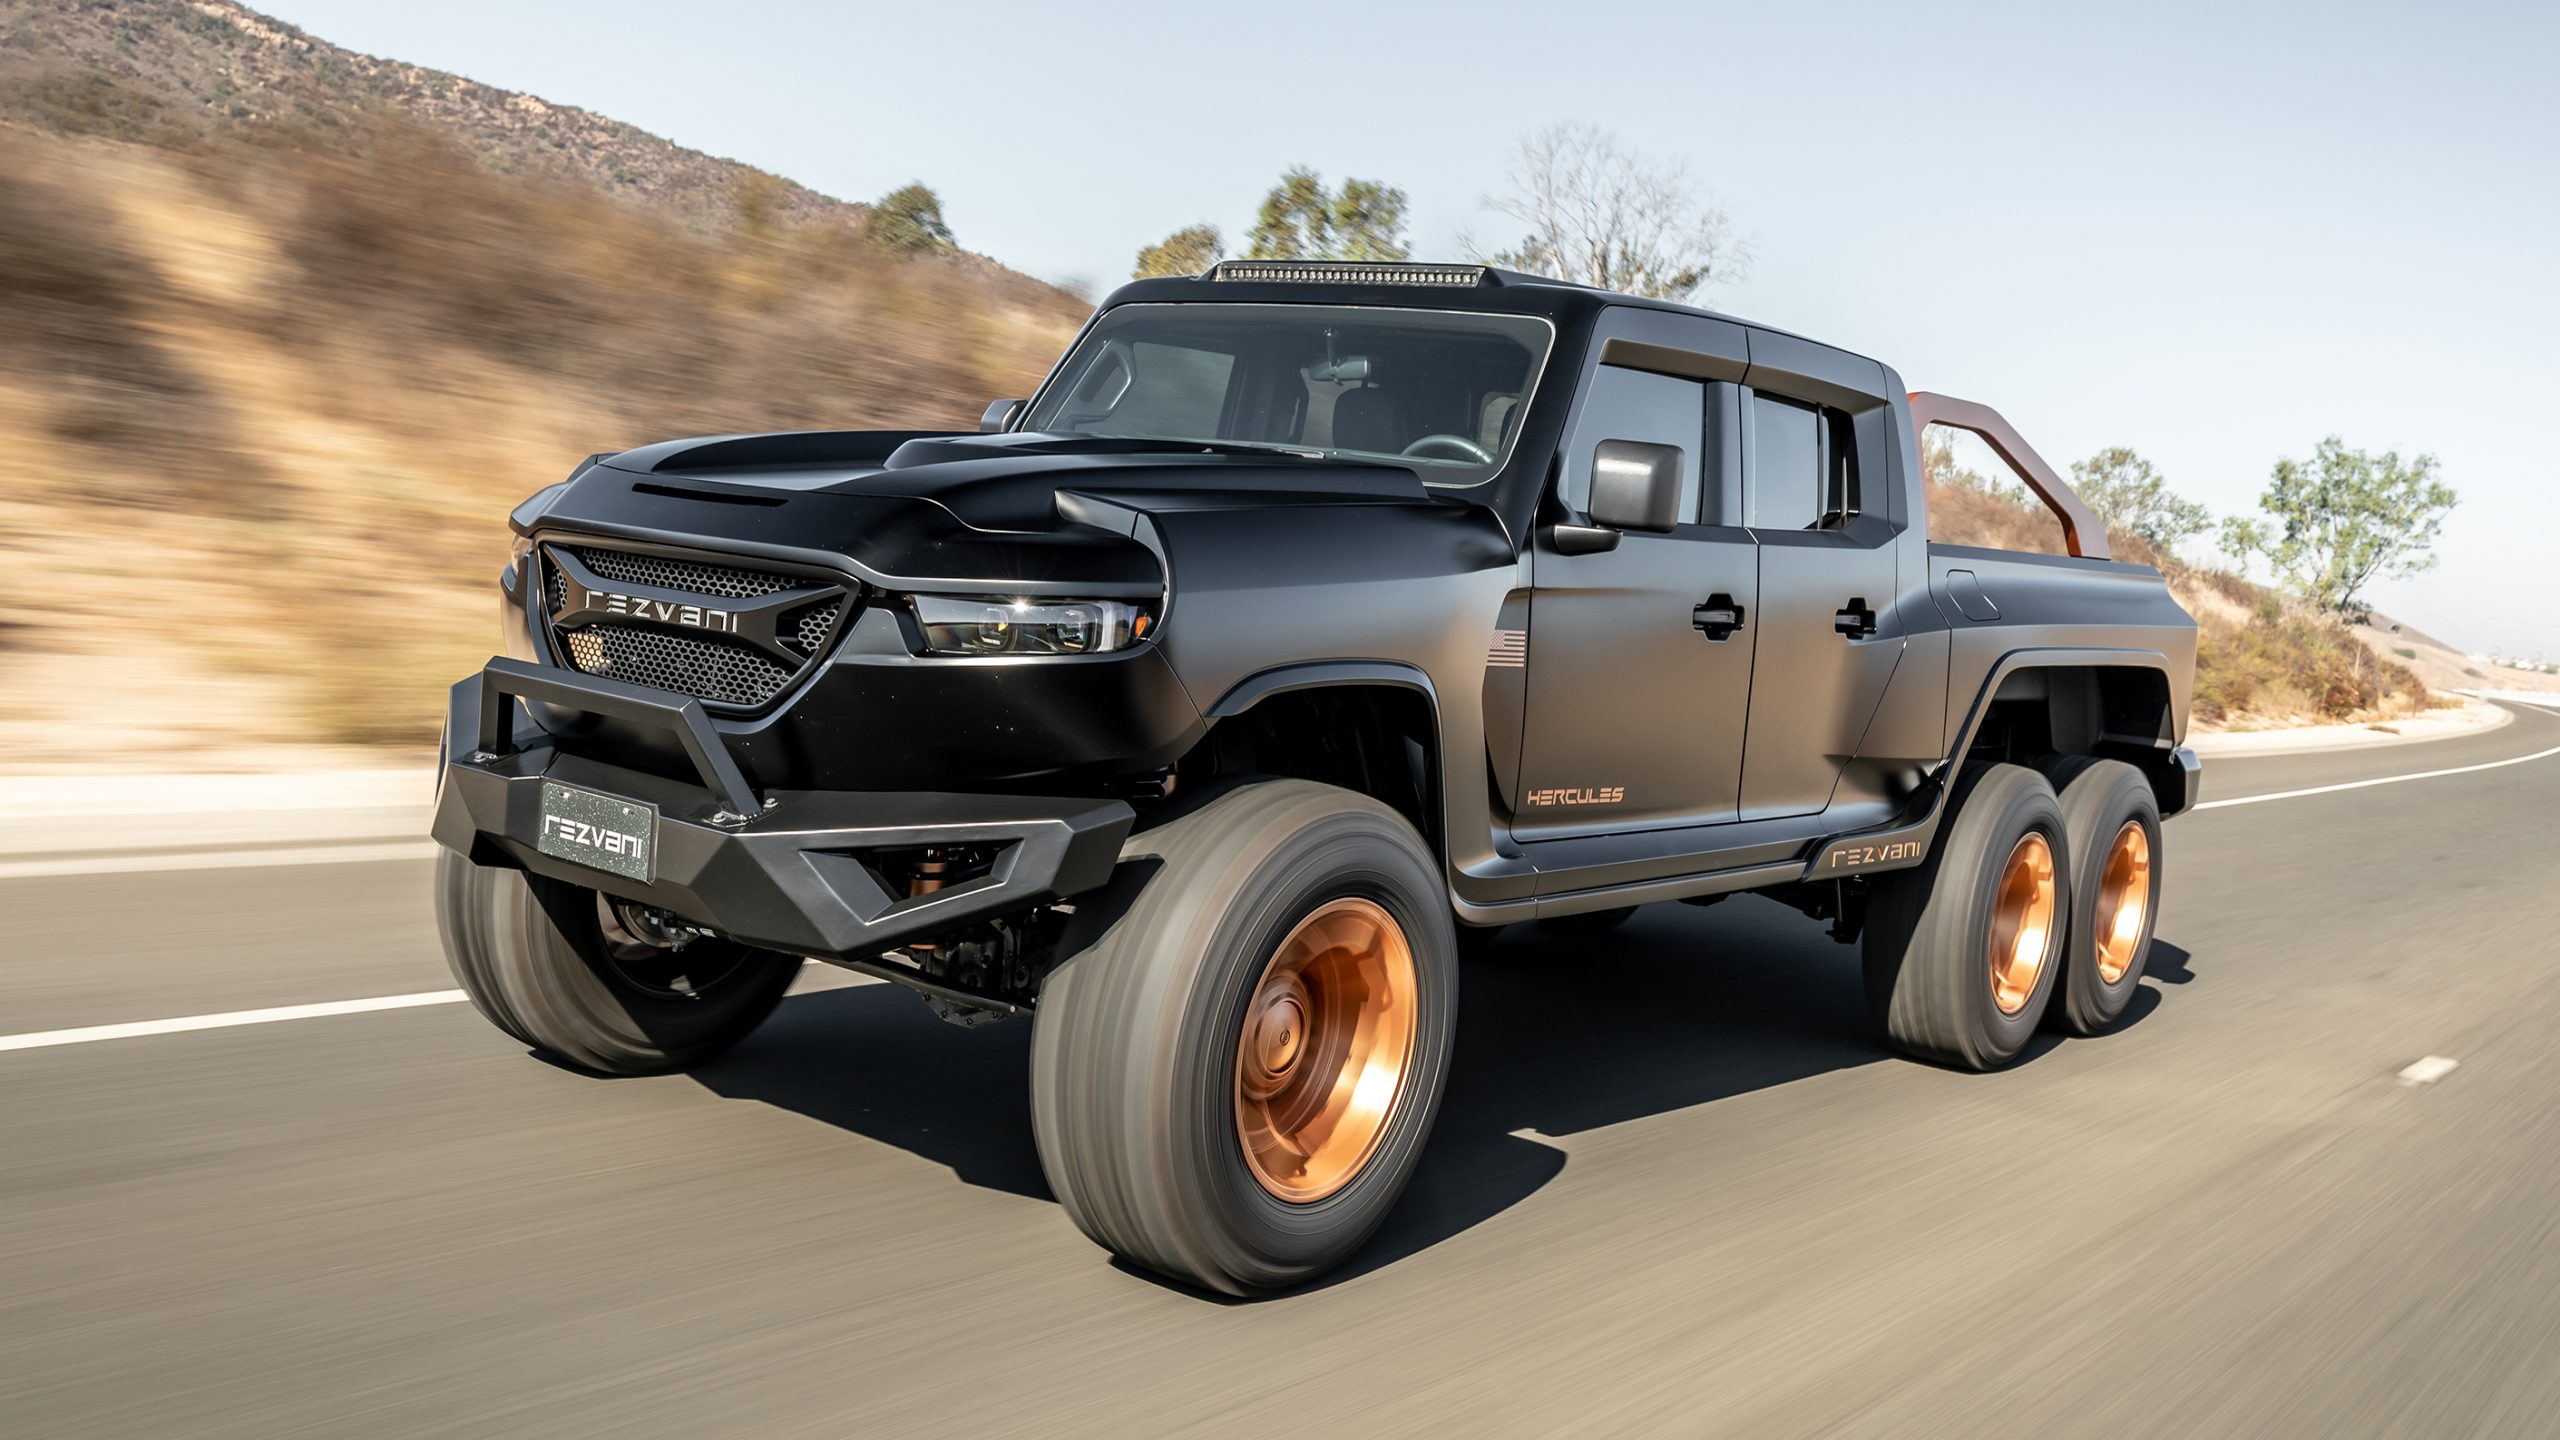 Rezvani Motors 6x6 Supertruck gaining recognition from popular YouTube influencers.